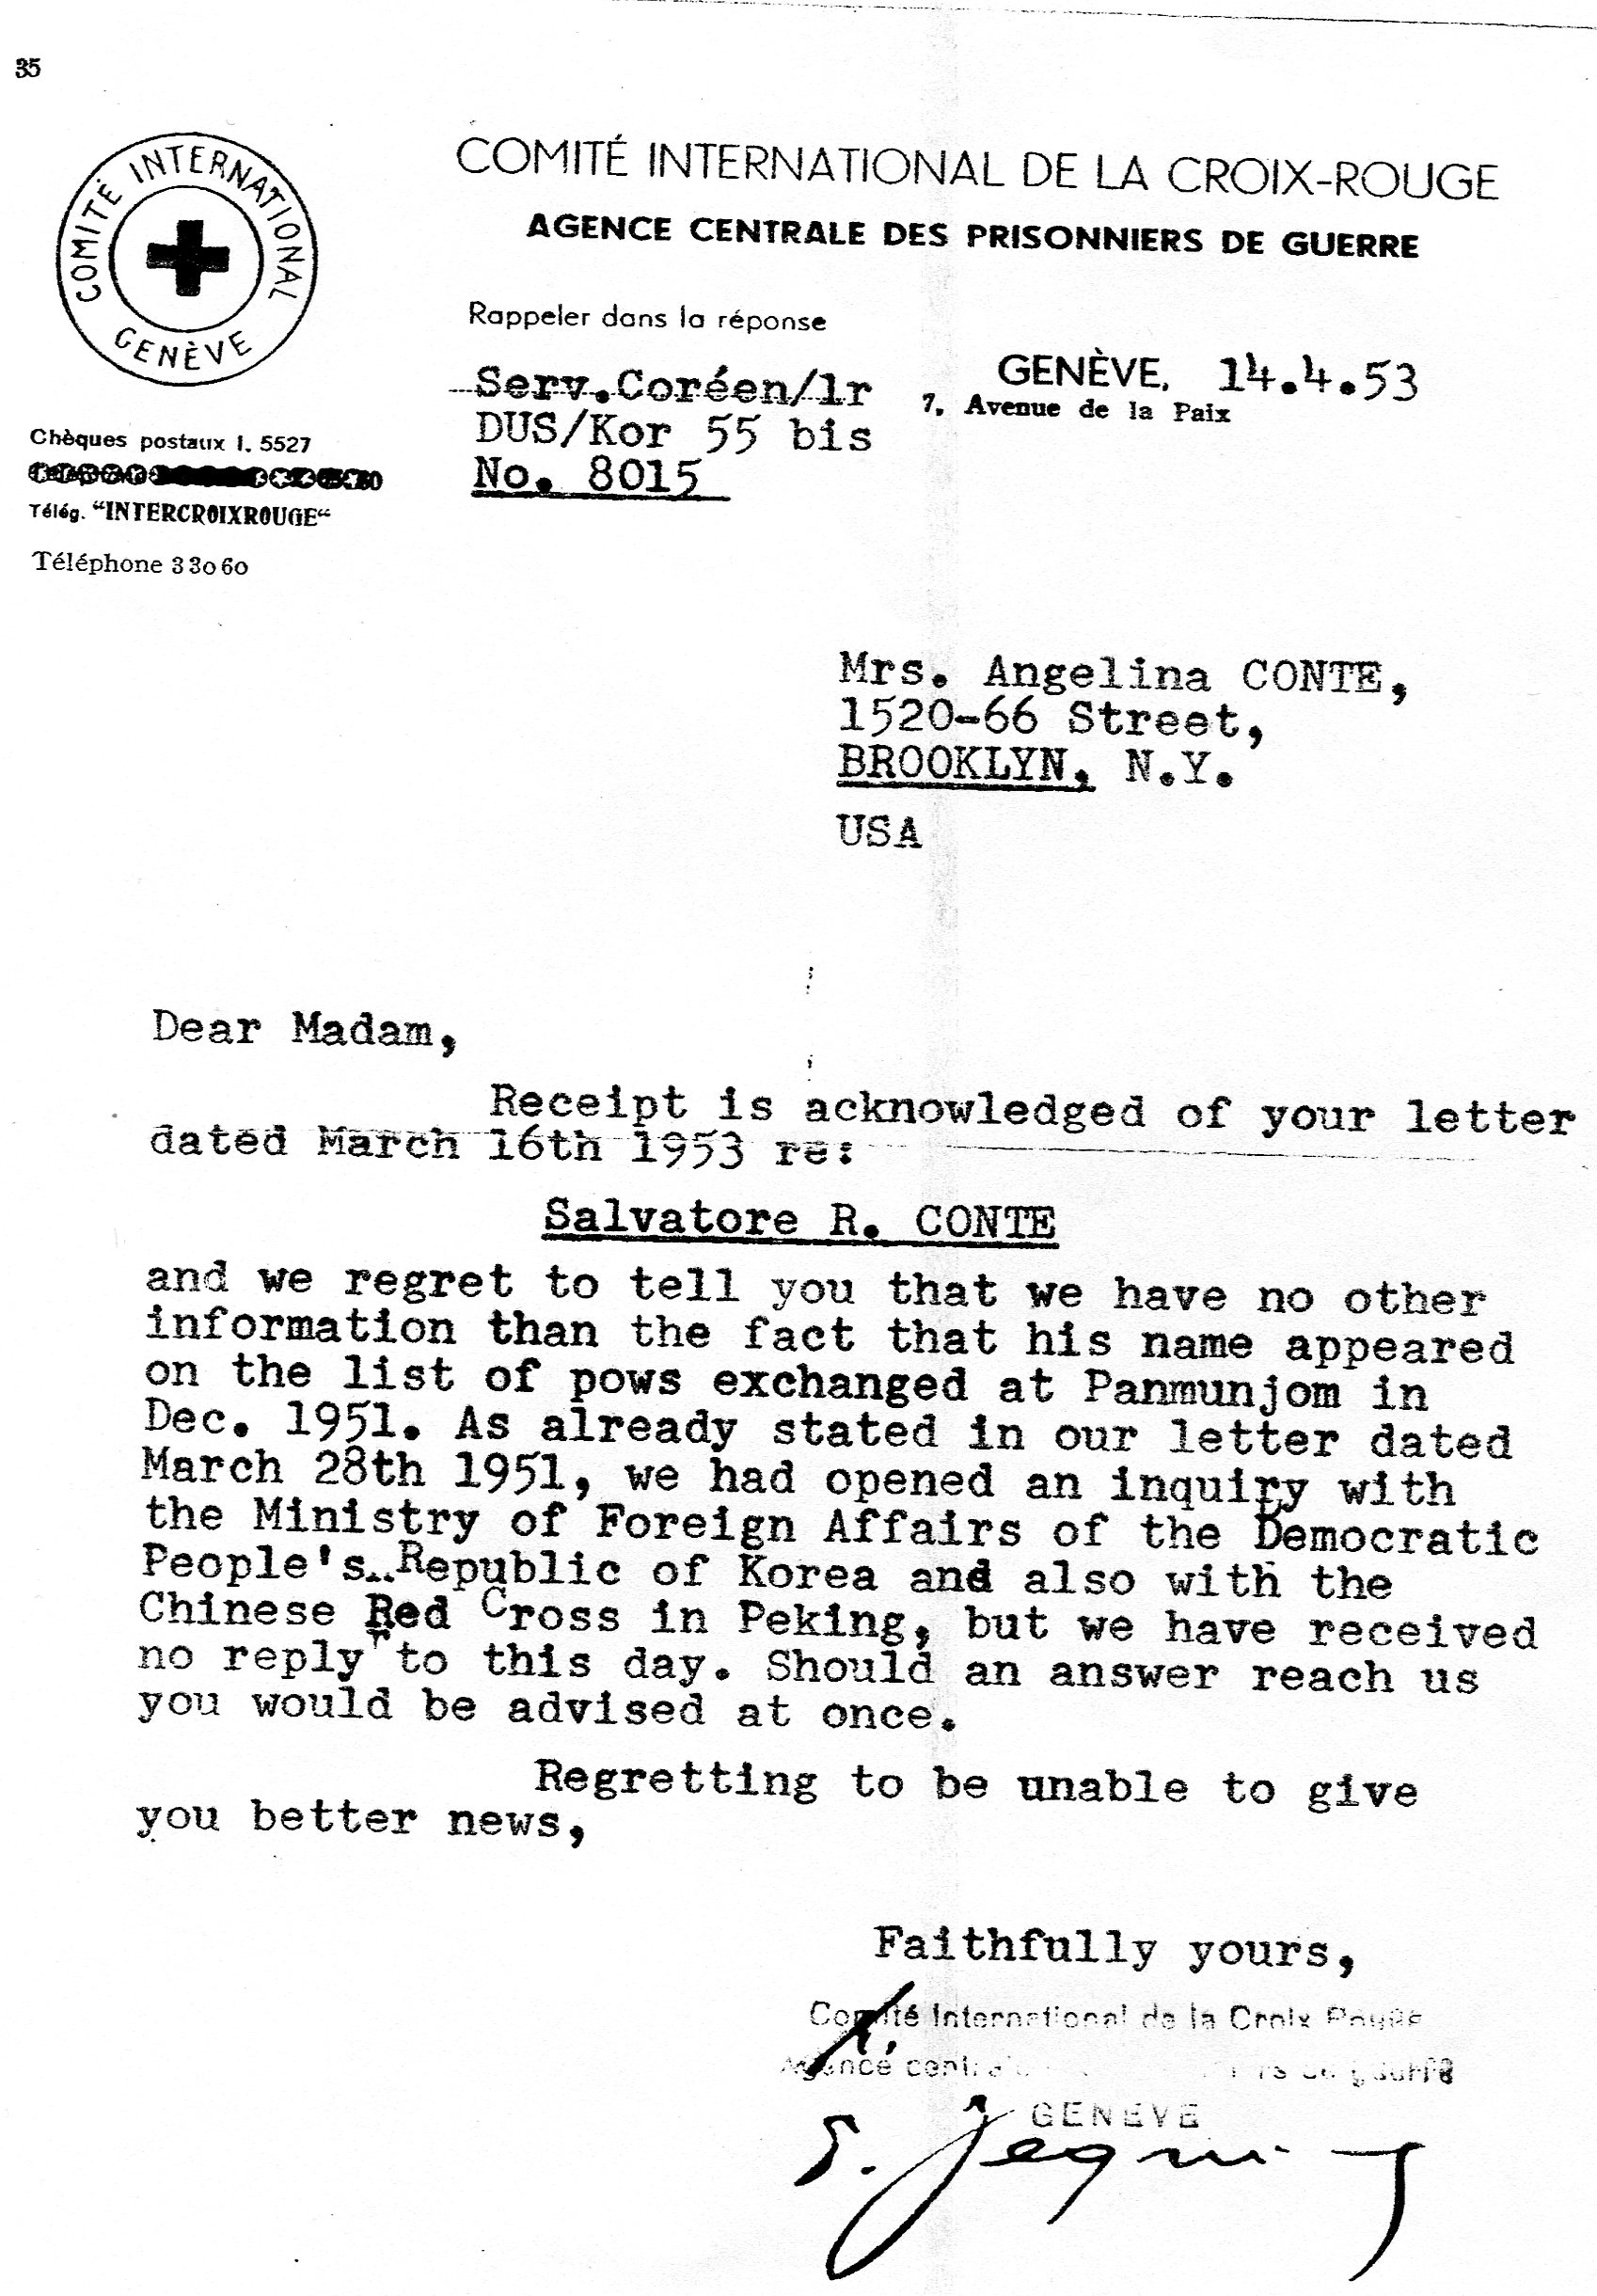 A letter from the International Committee of the Red Cross, written on April 14, 1953. It informed Conte's family members that no updated information on Conte's whereabouts were discovered since 1951. 